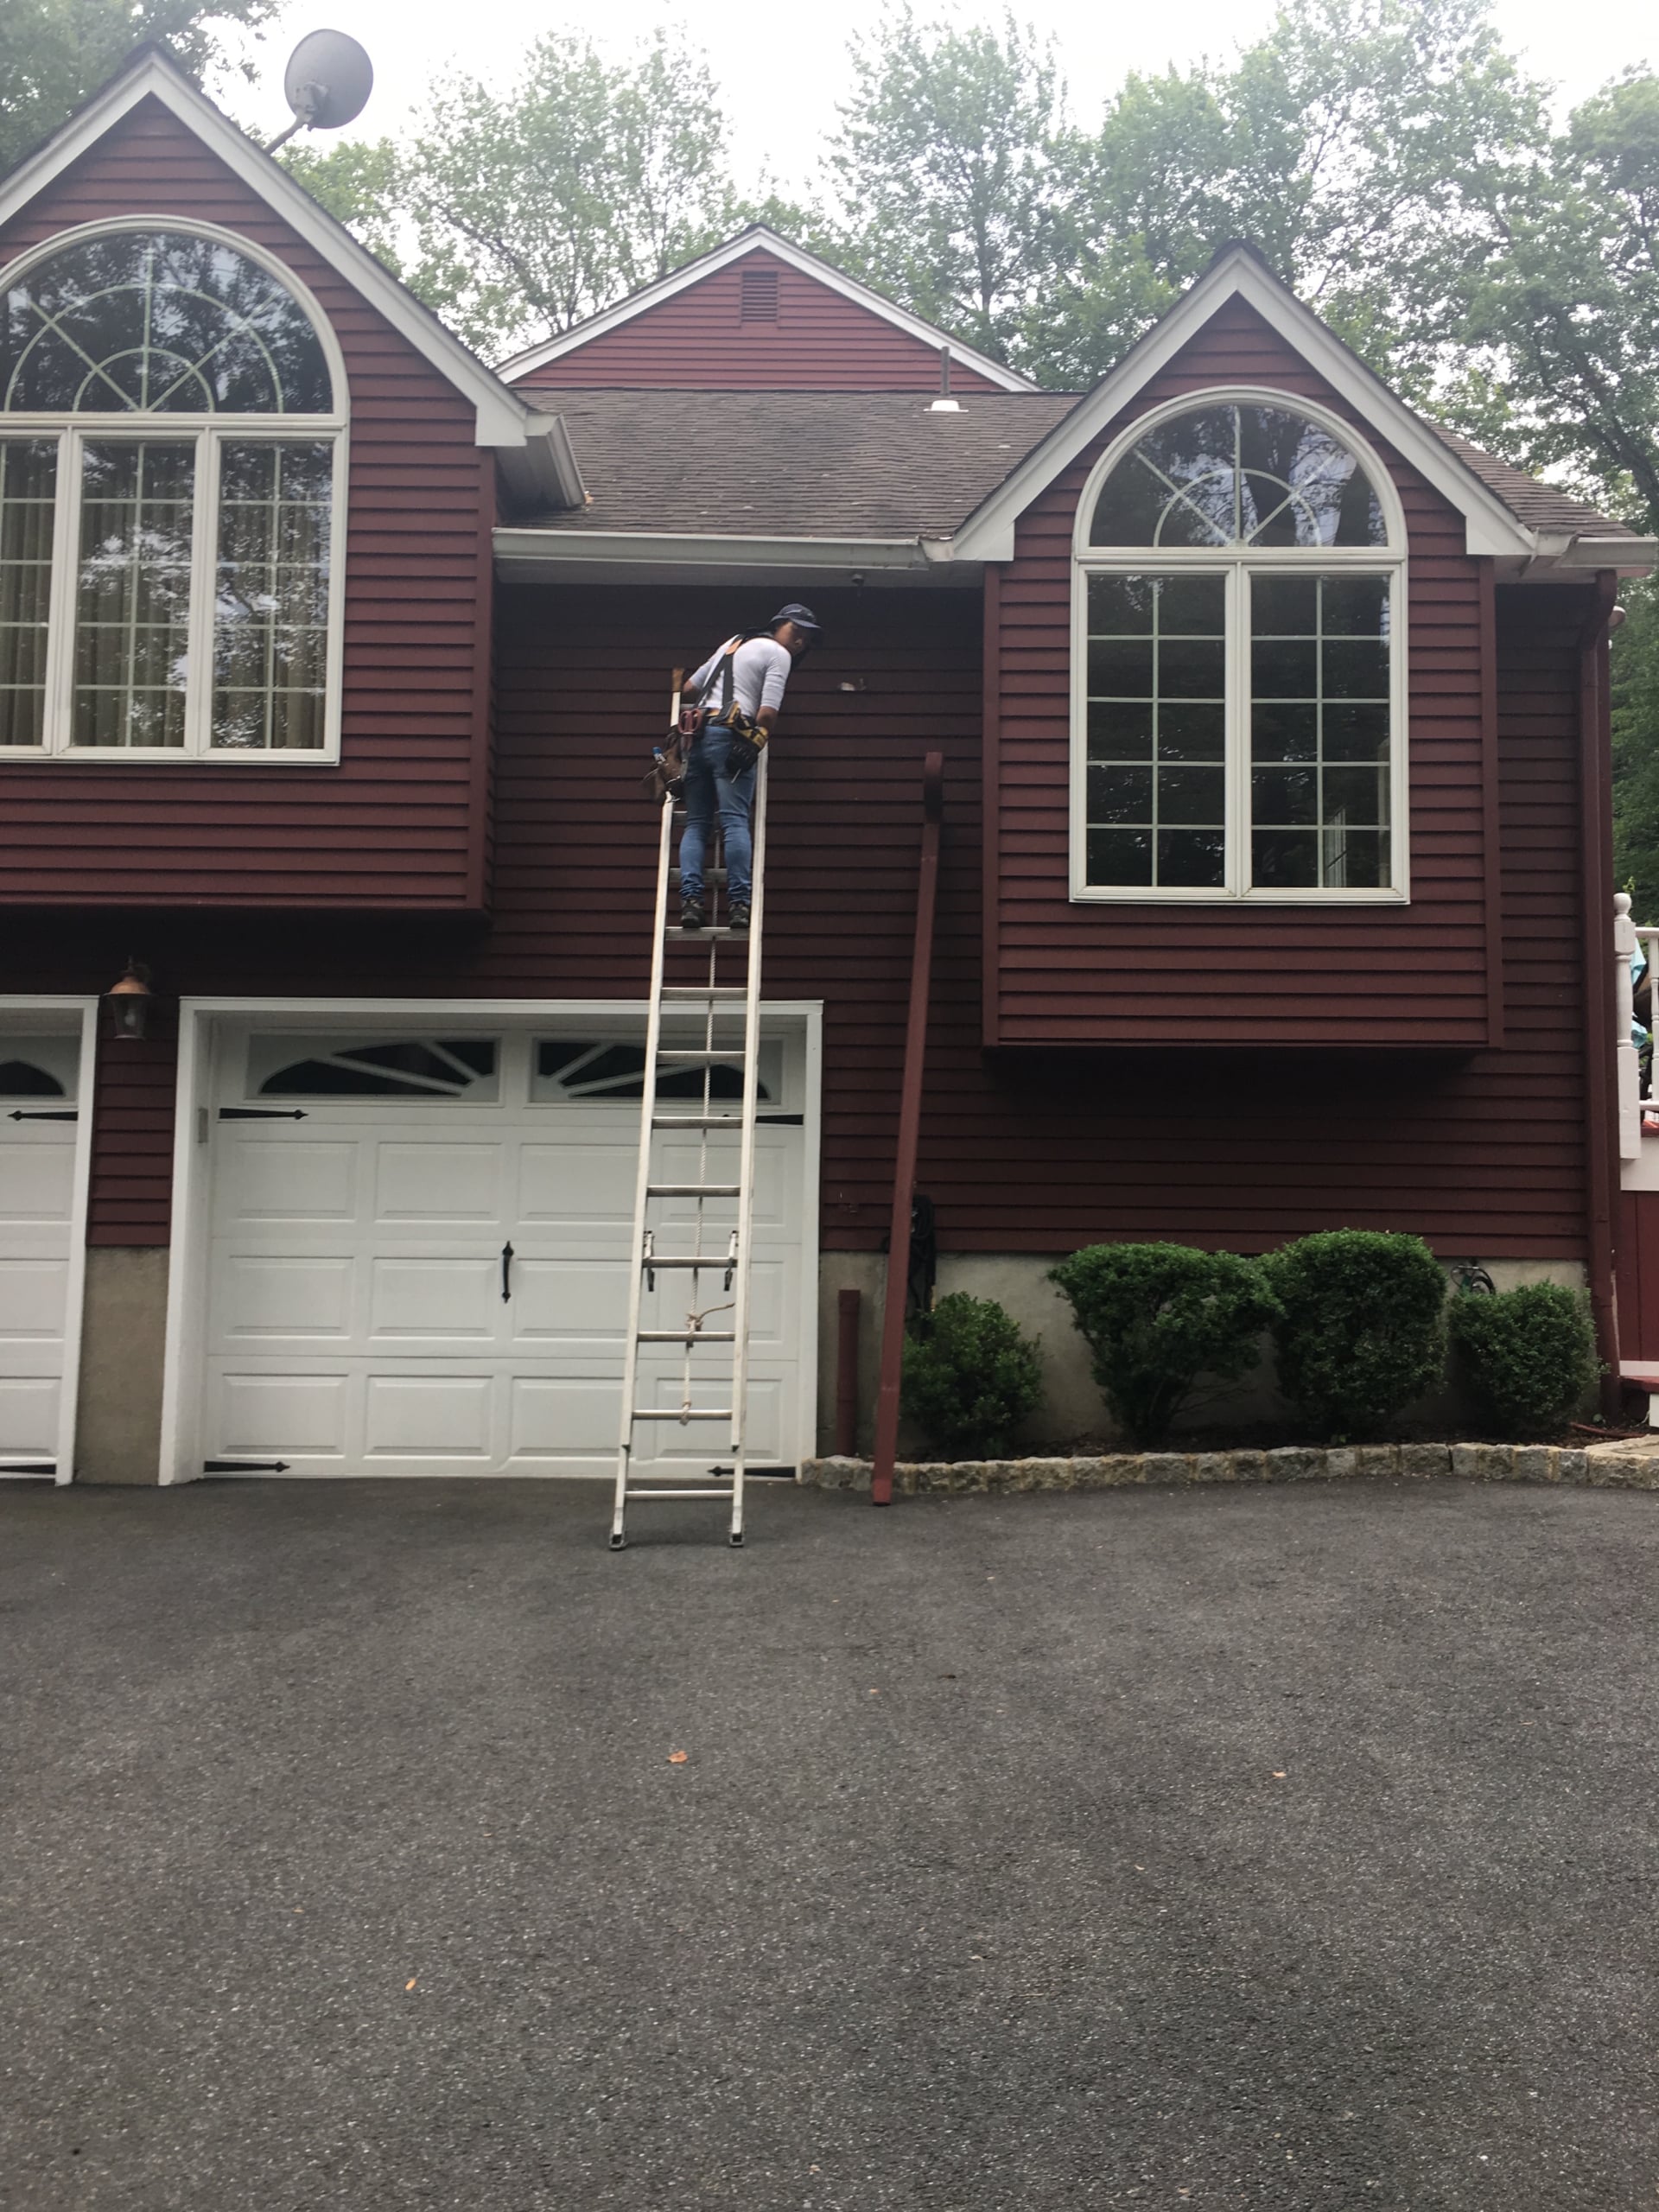 Gutter And Downspot Installation In Upper Saddle River Nj Area